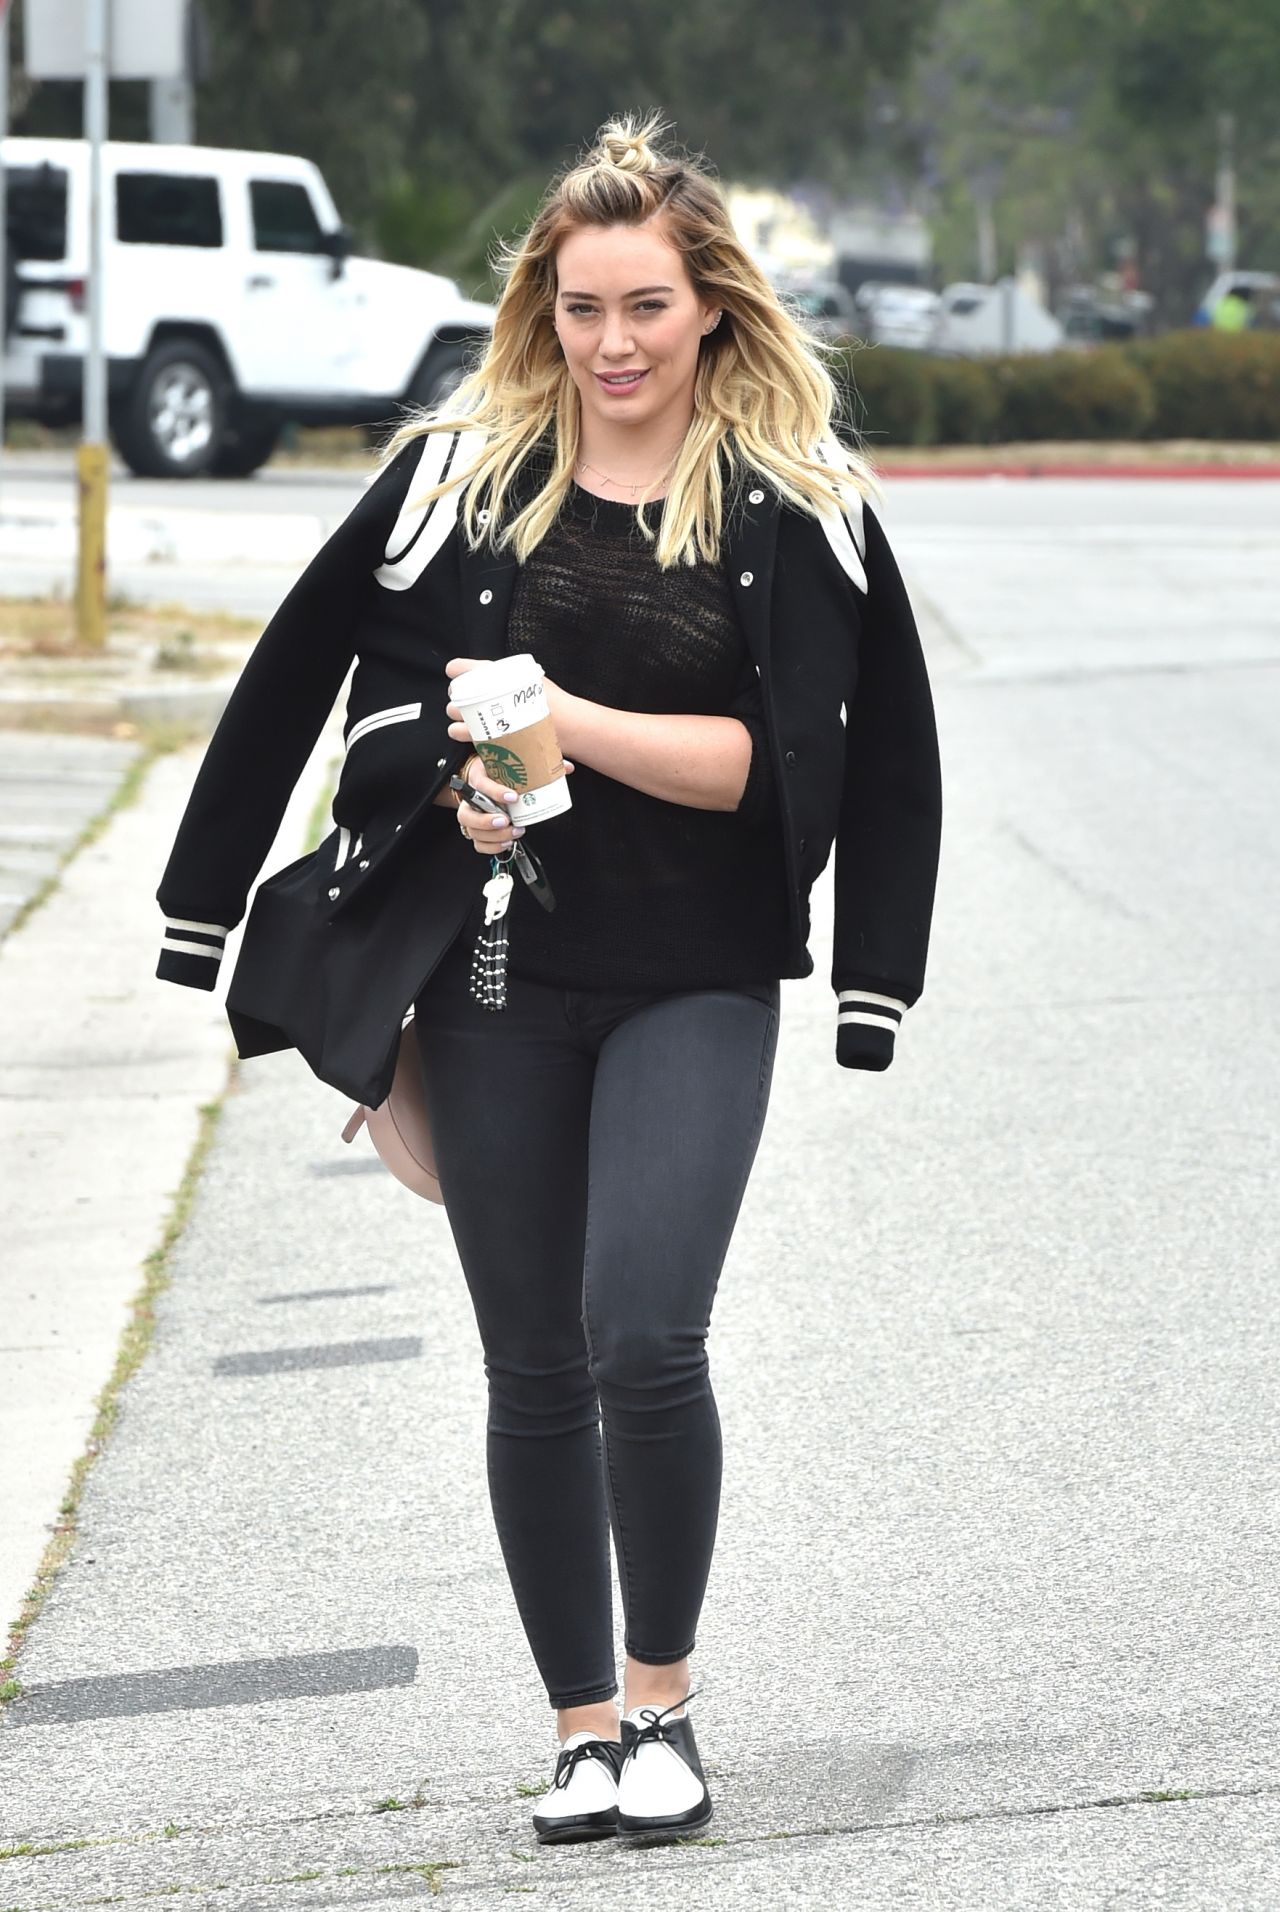 Hilary Duff - Leaving a Friend's House in Beverly Hills 10/5/2016